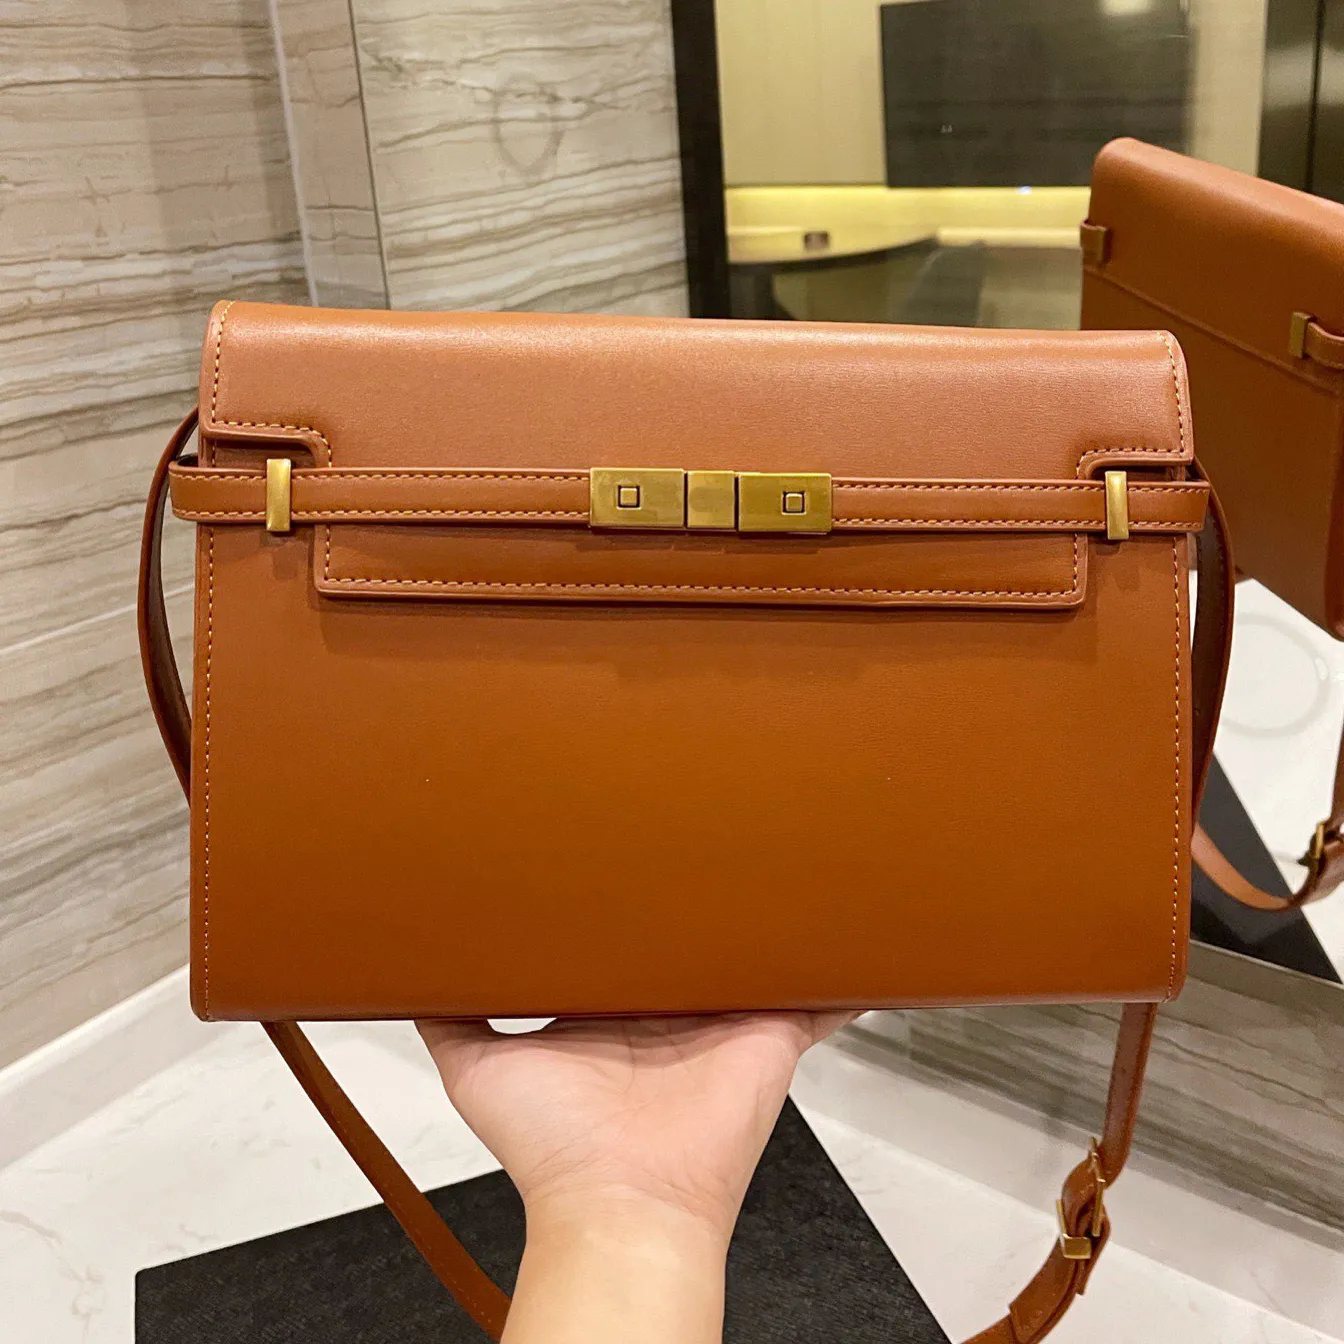 High quality wallets luxury walle designers women bags mini purses crossbody Shopping shoulder bag real leather Handbags